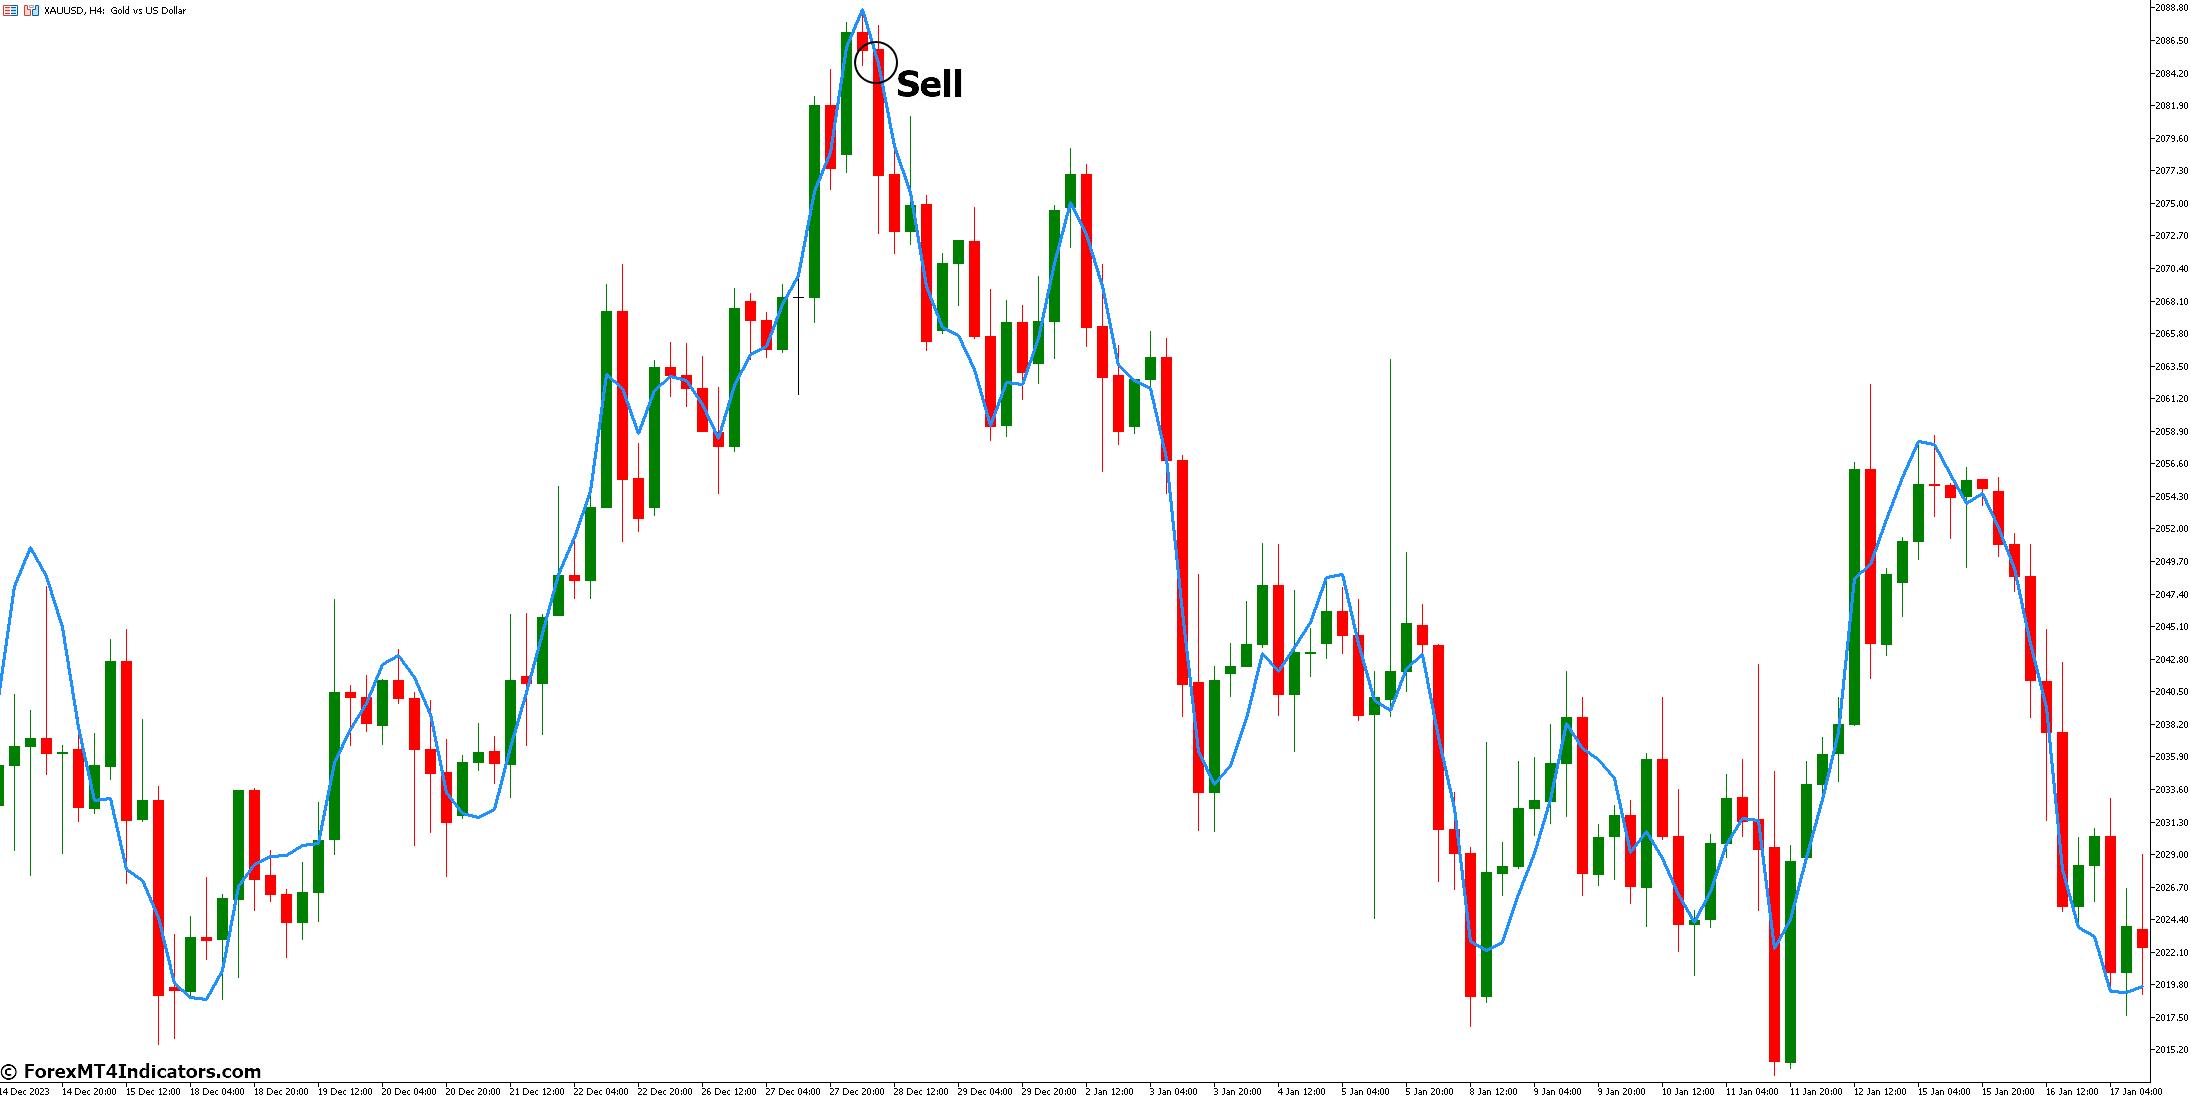 How to Trade with Parma Indicator - Sell Entry